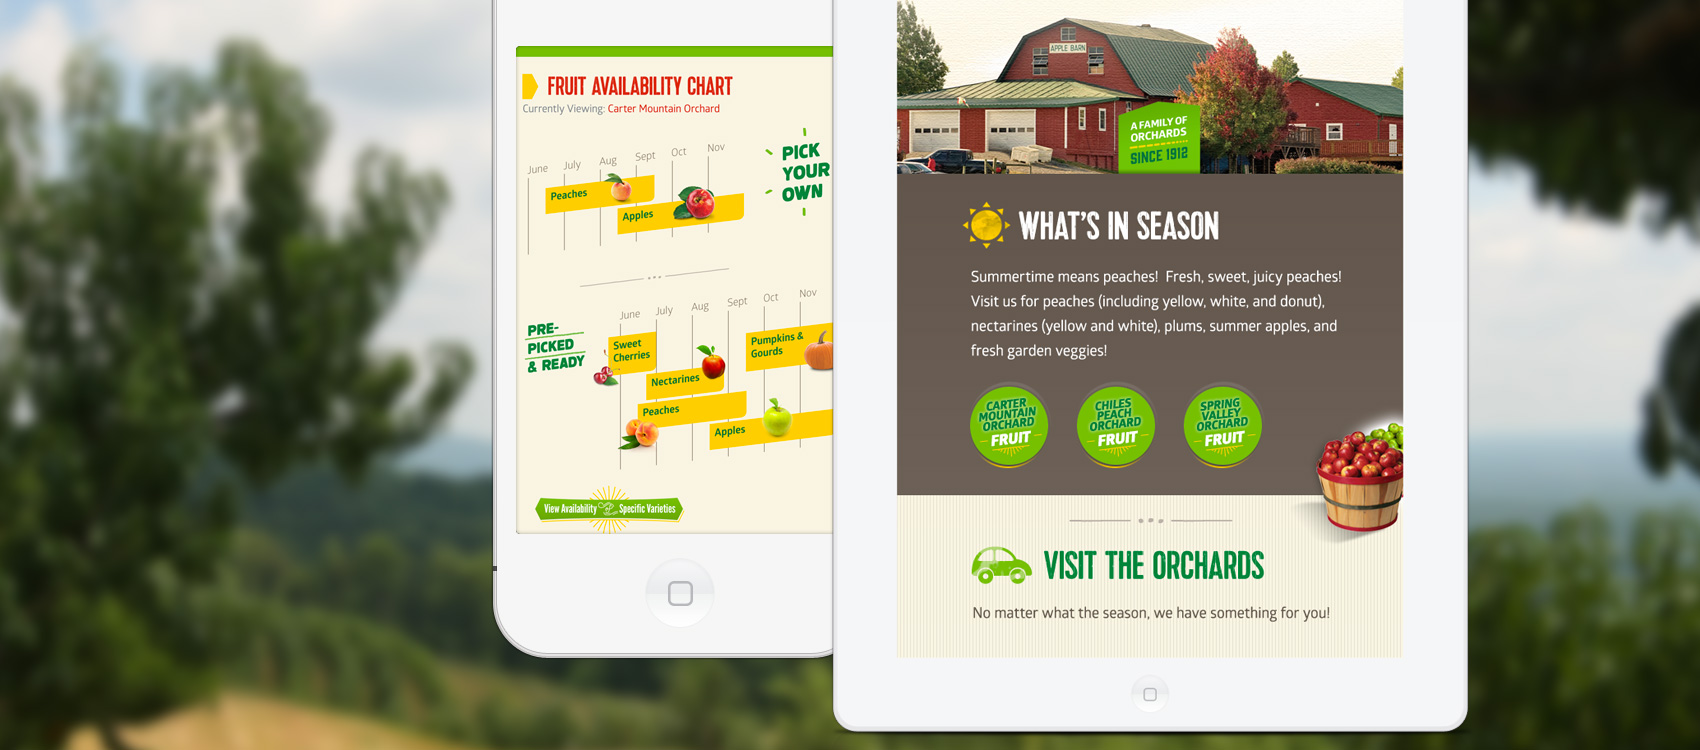 Mobile-responsive website design, shown on mobile and tablet, for Carter Mountain Orchard in Charlottesville, VA